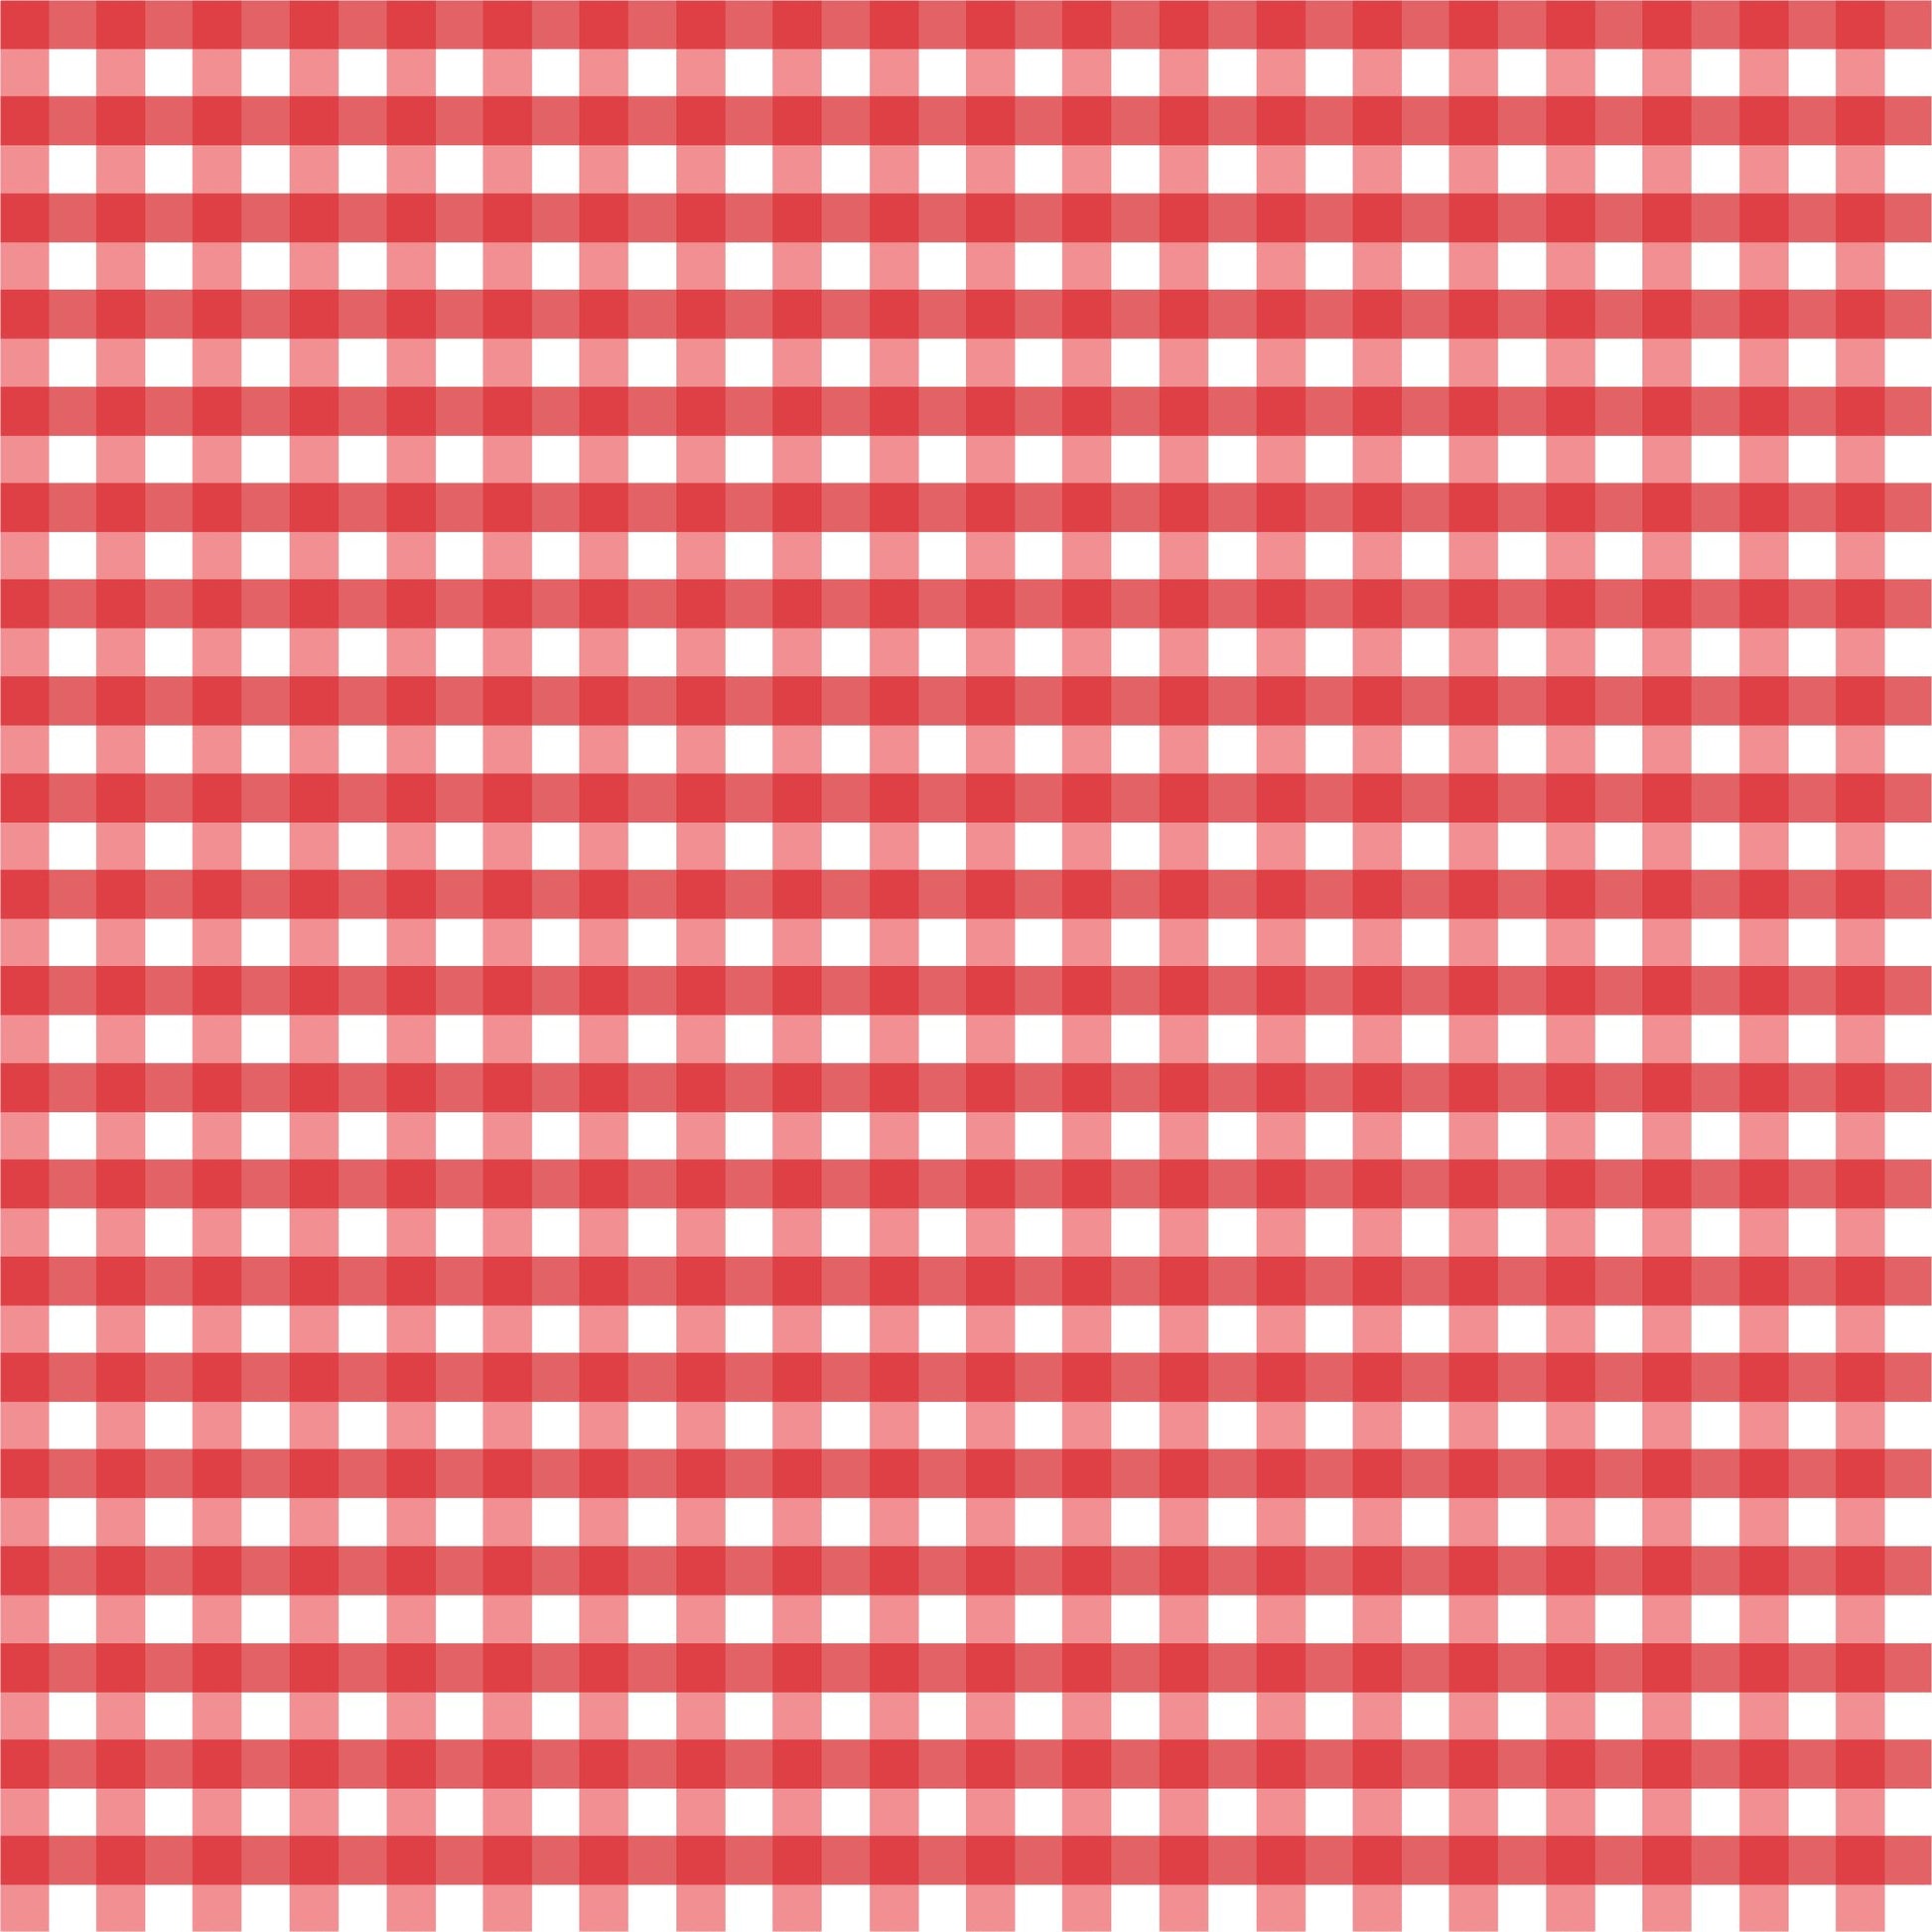 Red-Gingham-Check-Picnic-Rockabilly-Vintage-Inspired-RainbowsAndFairies.com-GINGH_RED-Pic_01